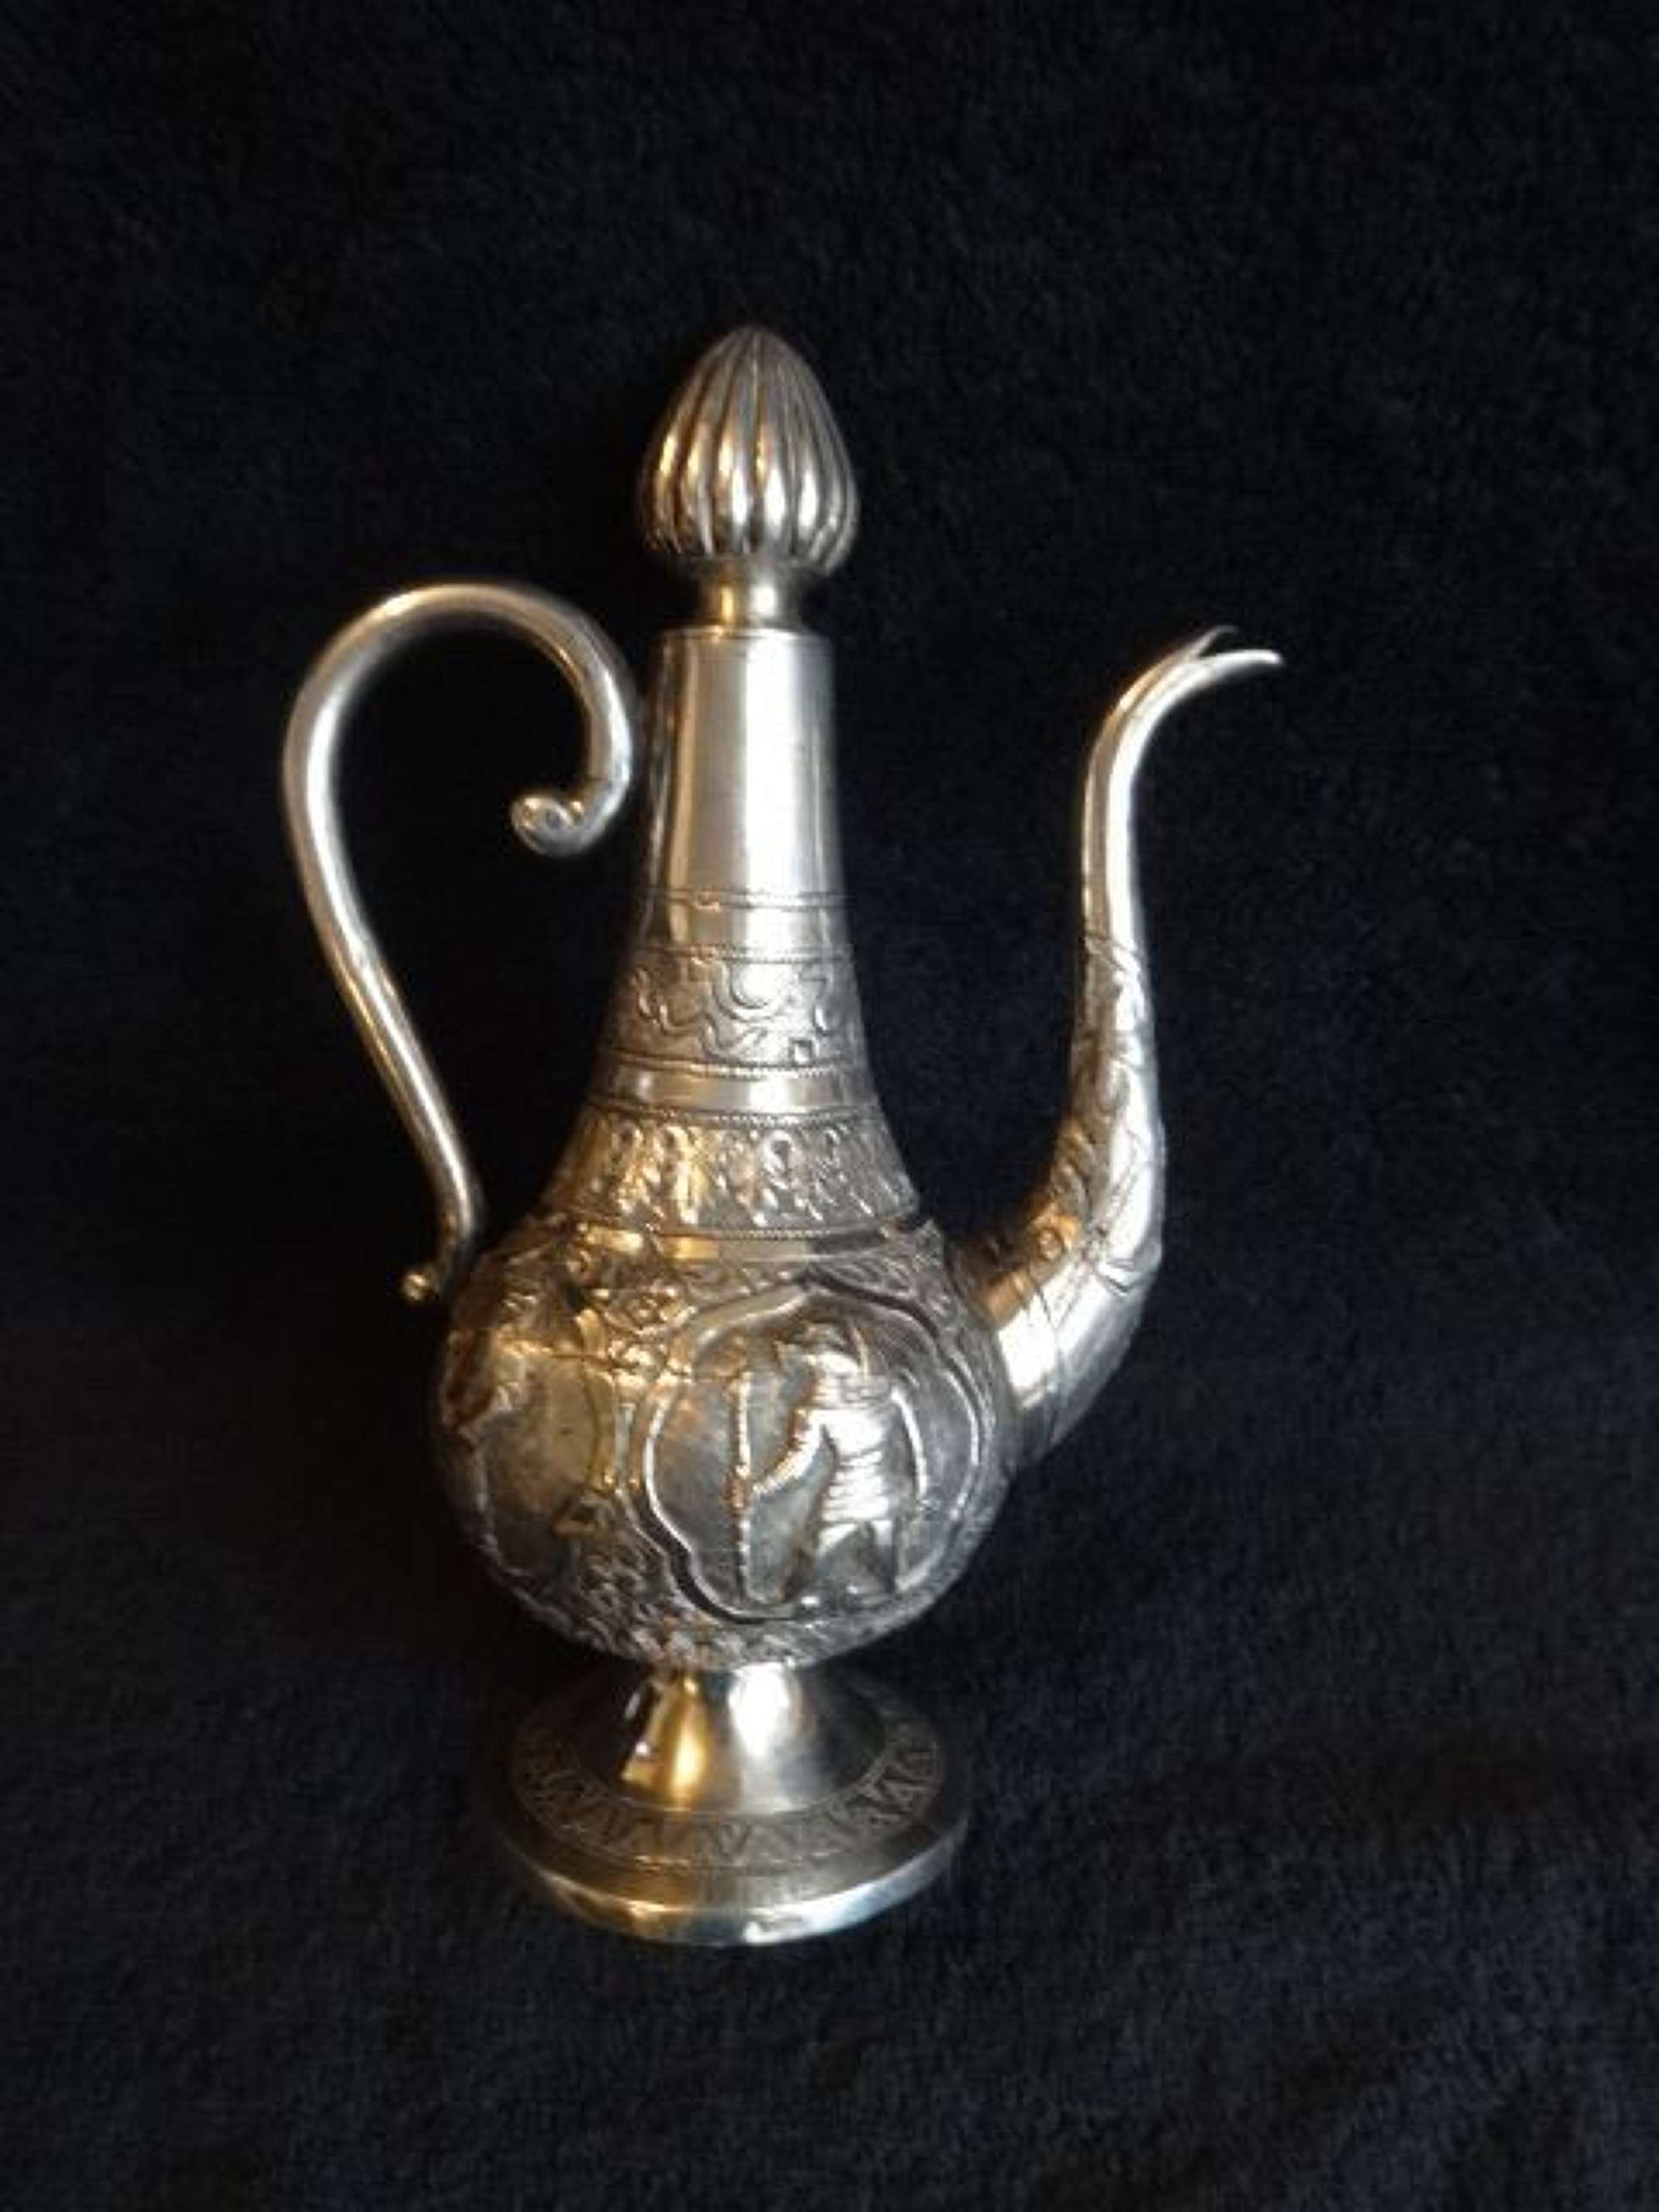 Exquisite C19th Indian Silver Coffee Pot